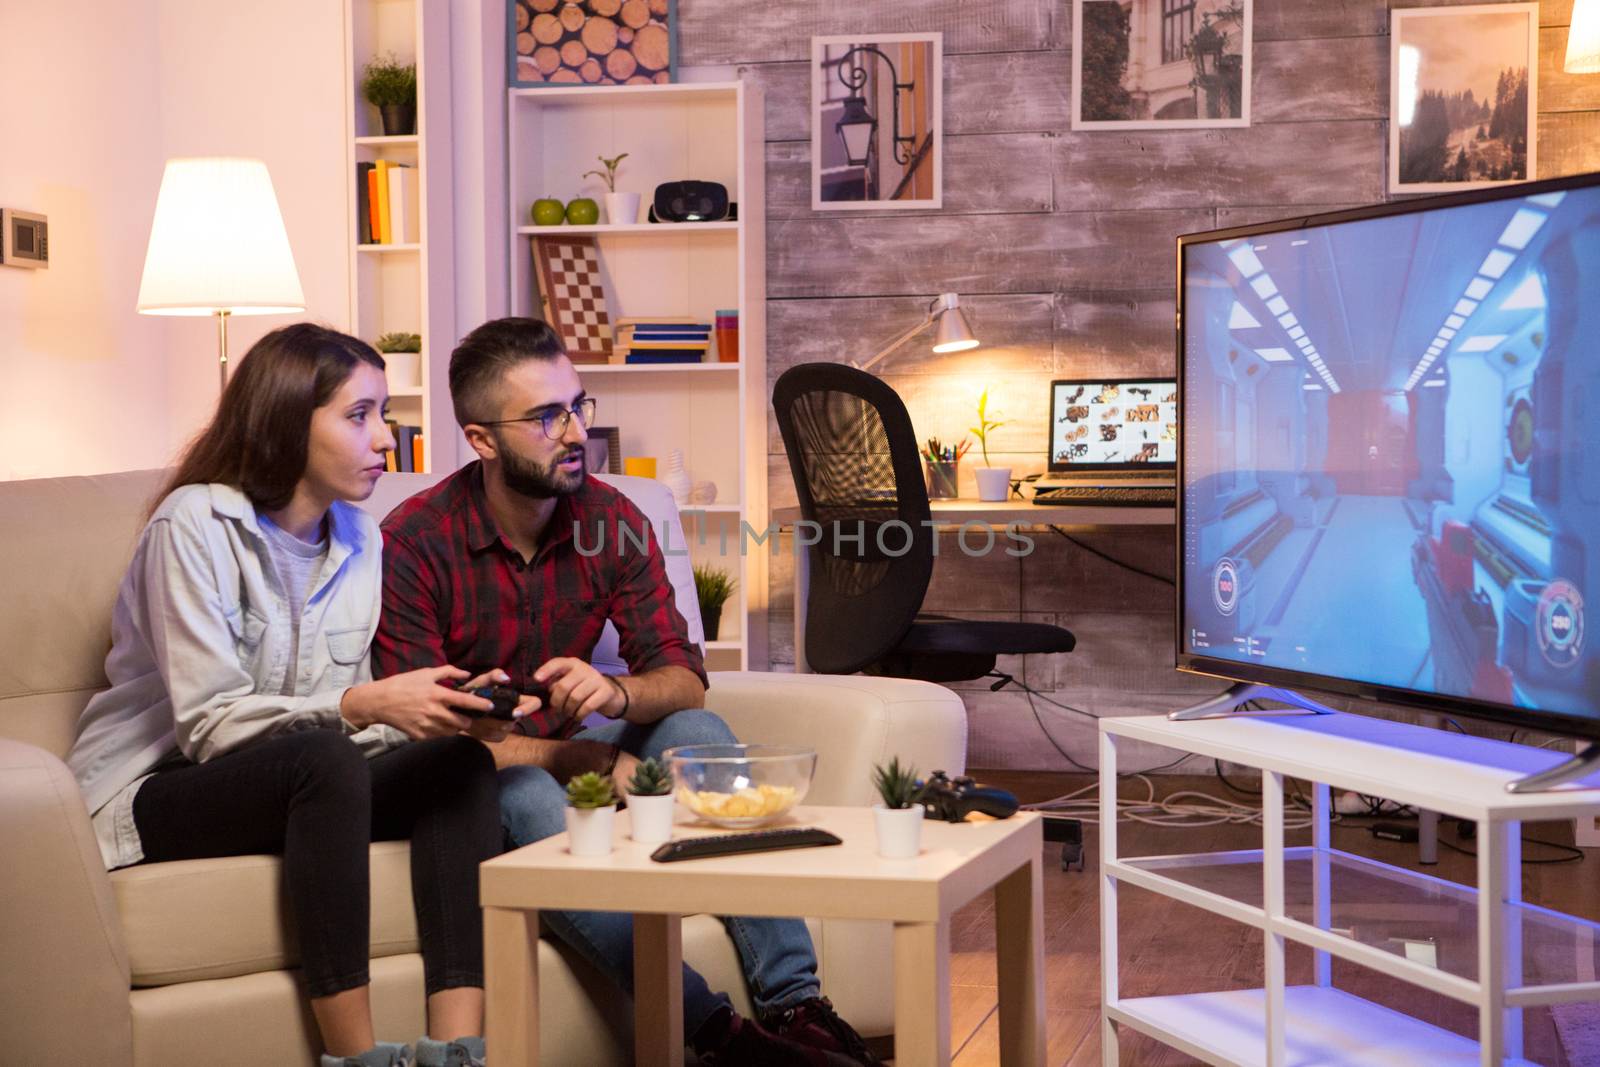 Boyfriend learning his girlfriend to play video games on television using controllers. Couple sitting on couch.